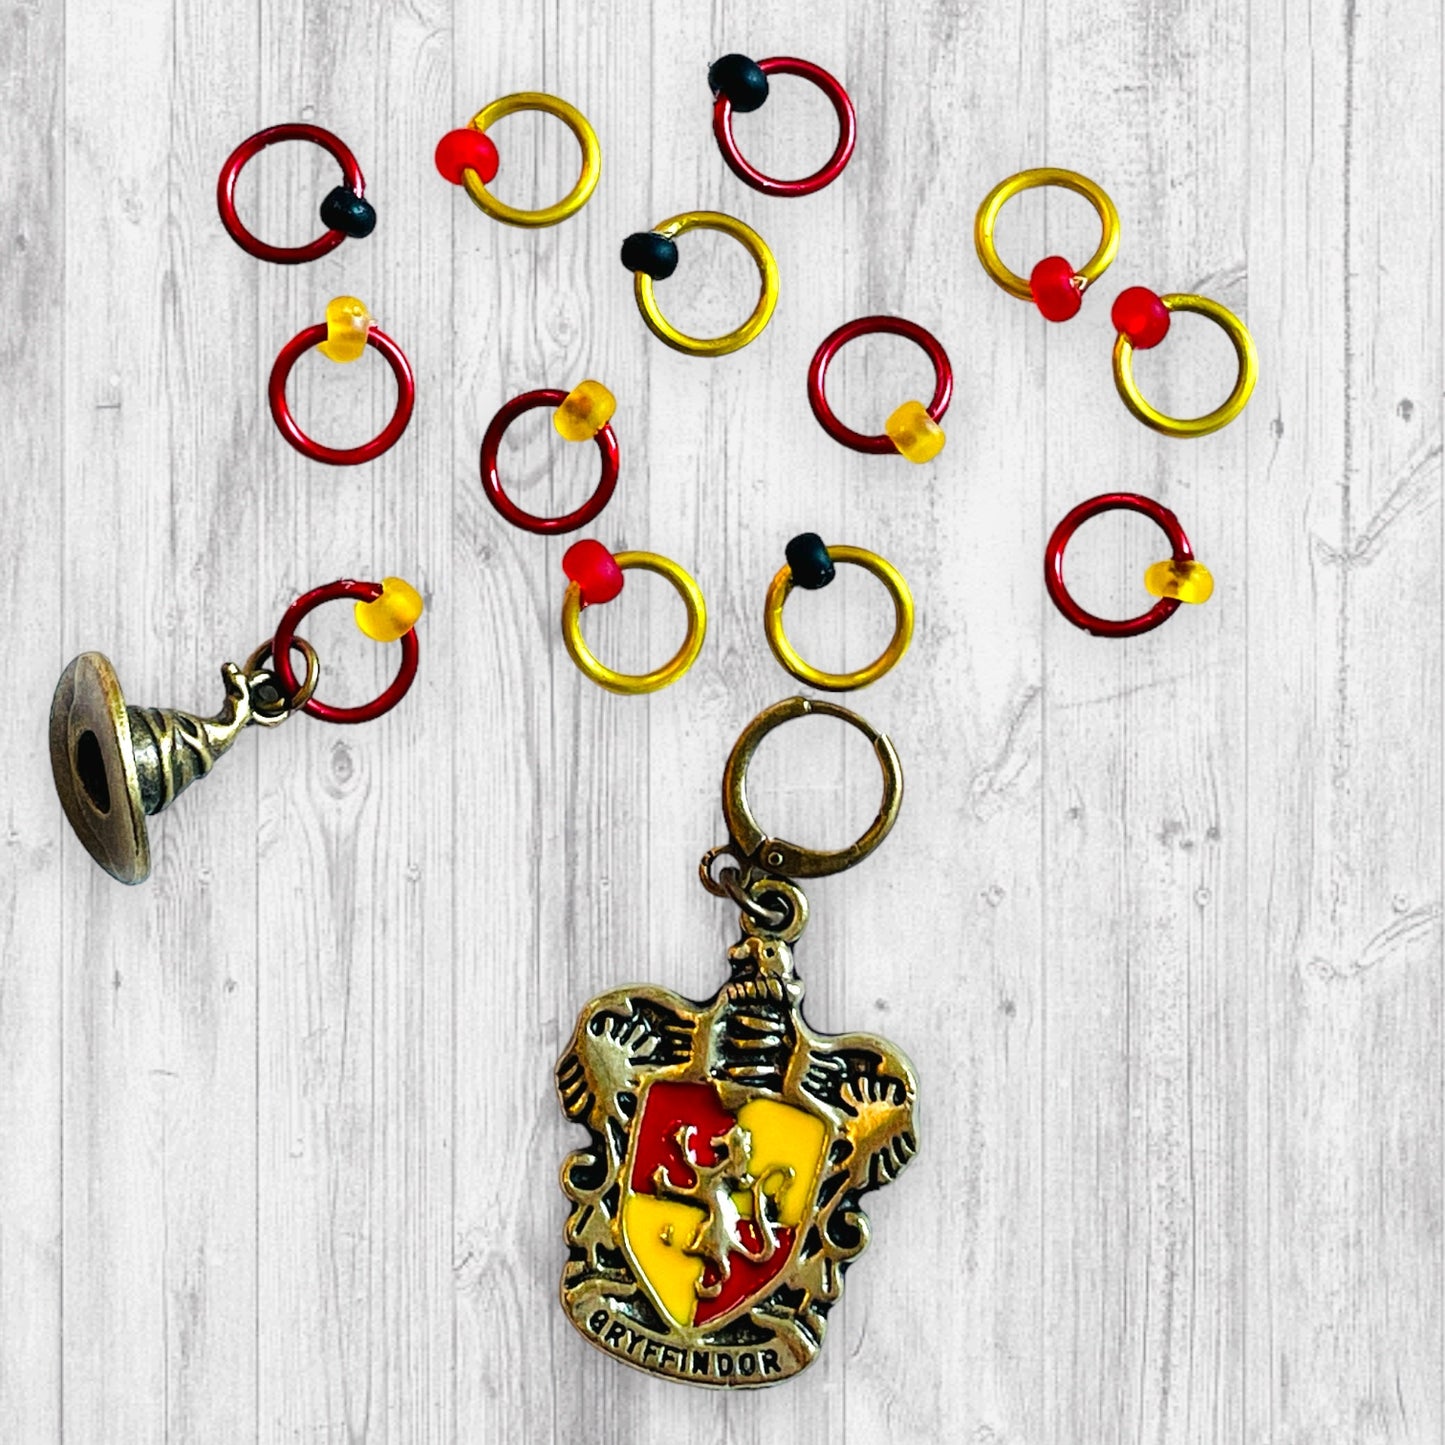 Sorted into Red and Gold Progress and Stitch Markers - AdoreKnit